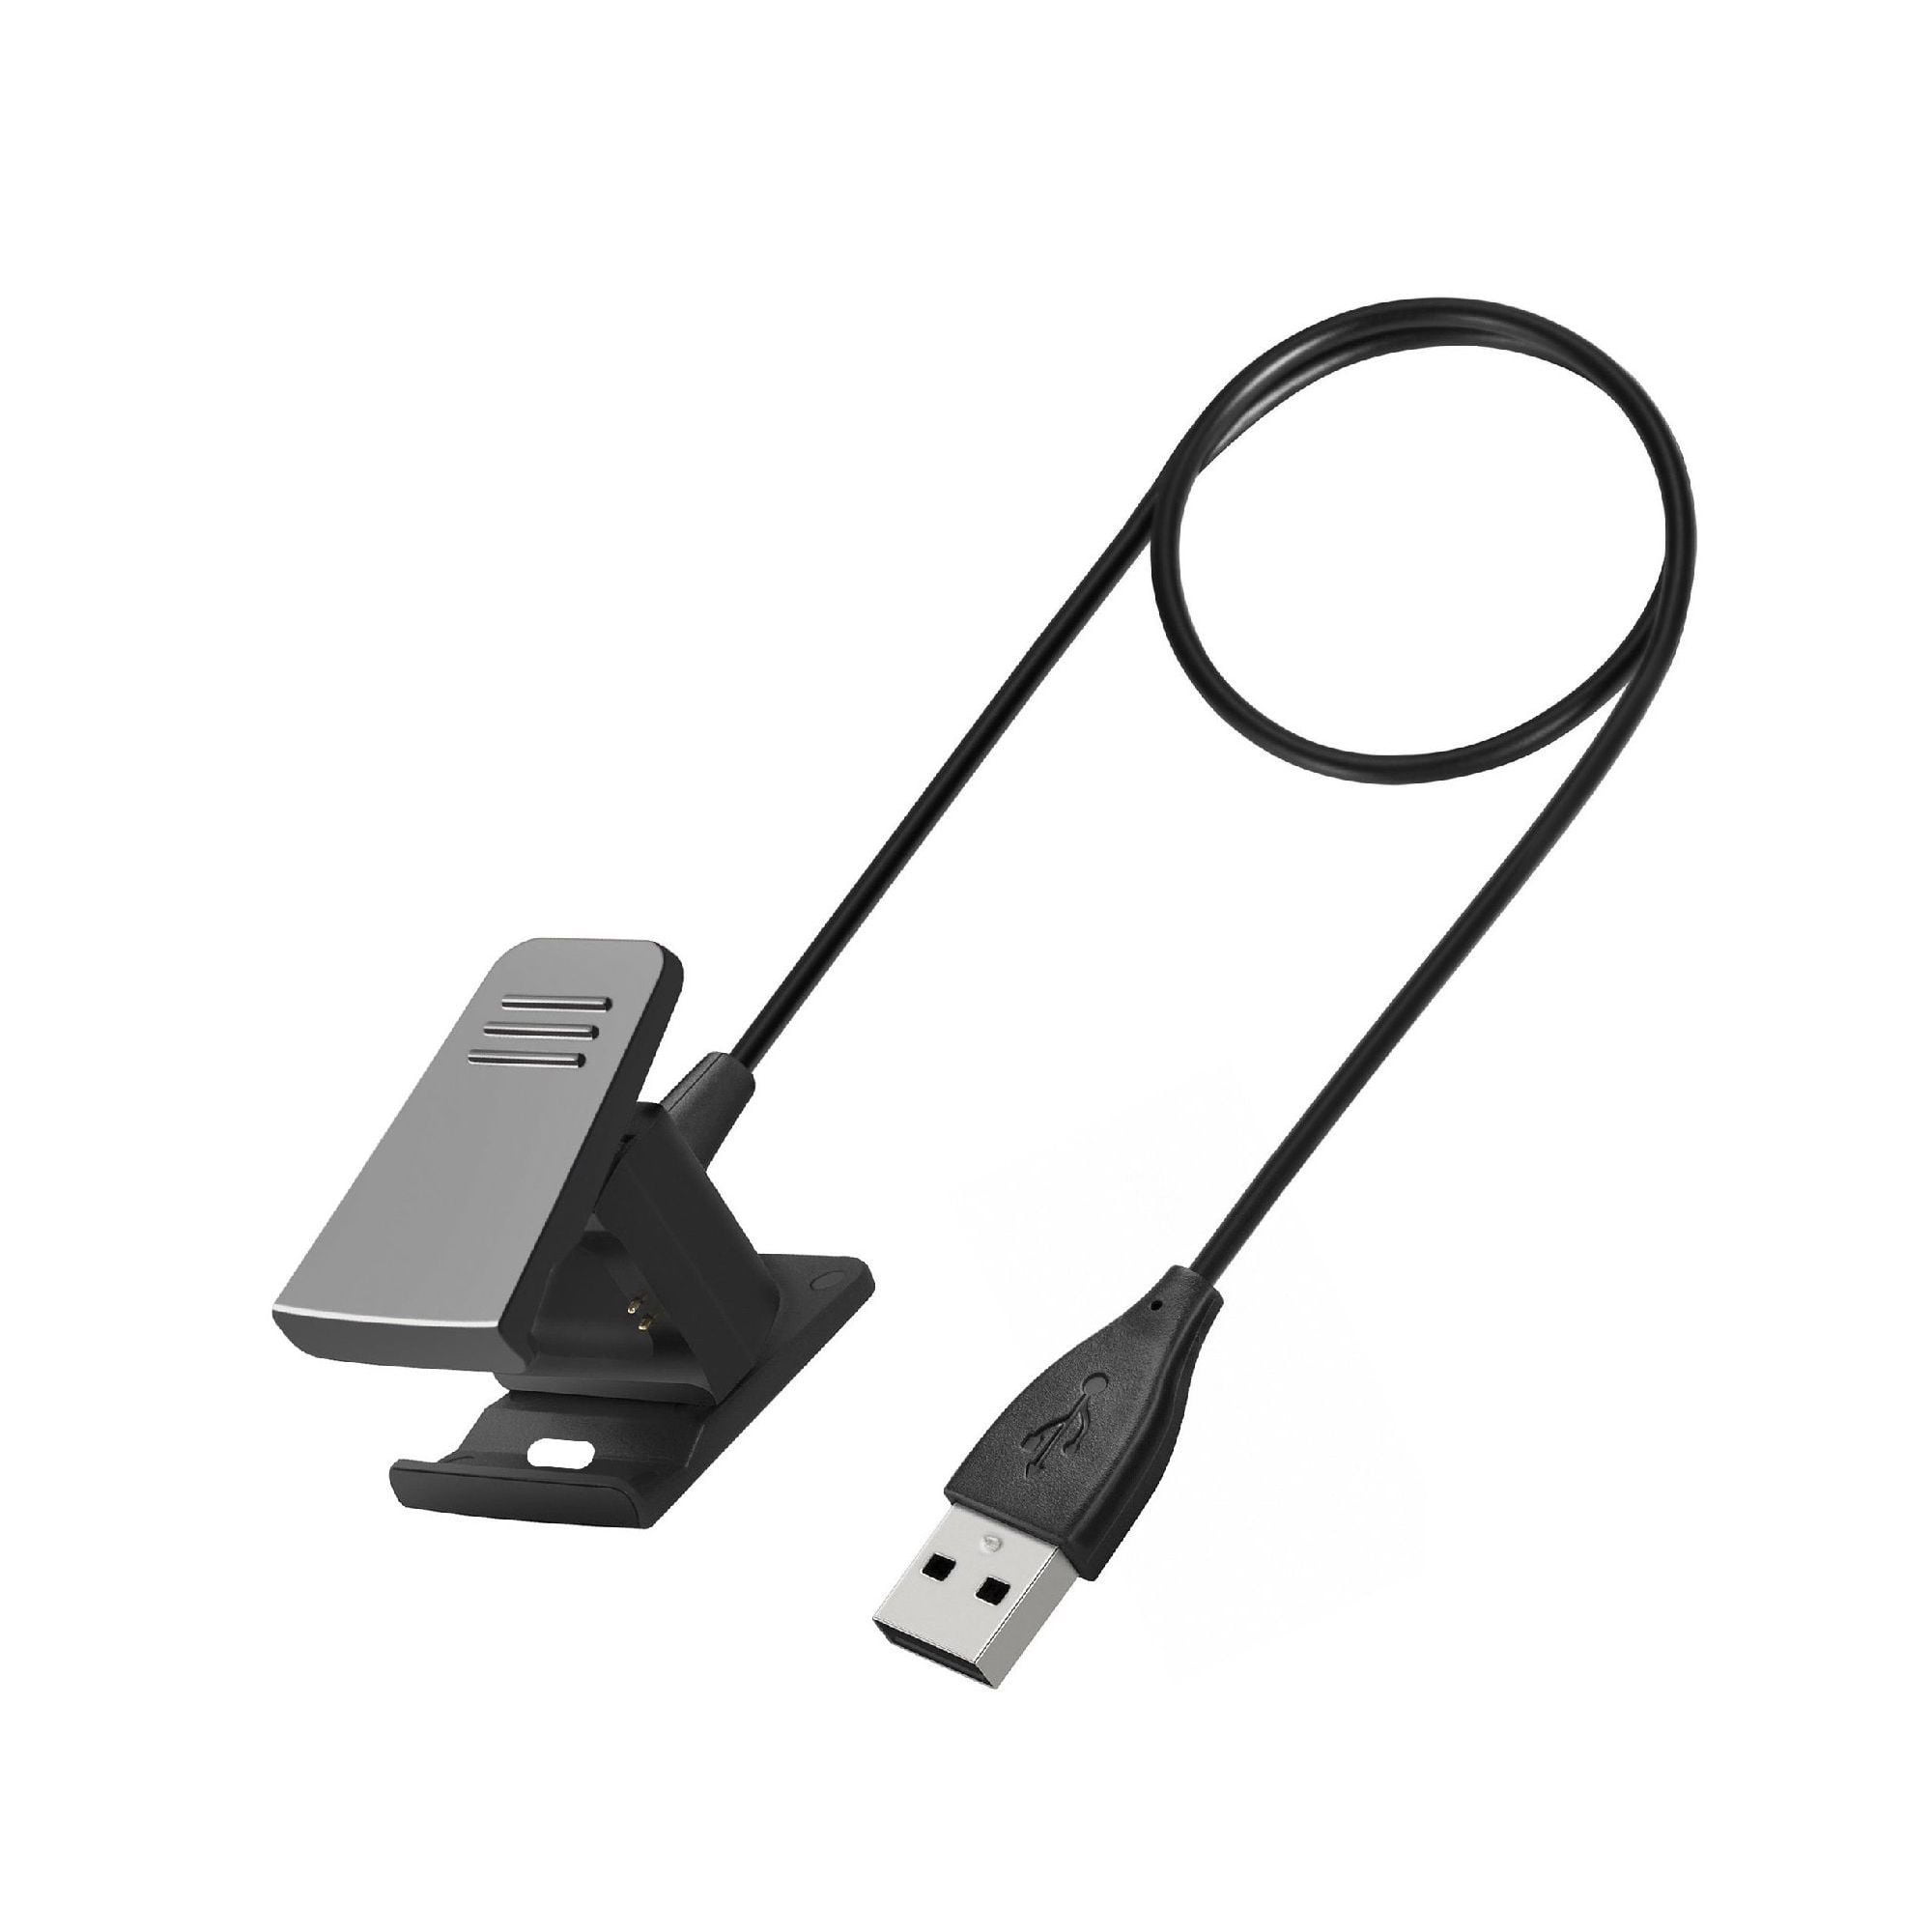 Fitbit Charge HR Replacement USB Charger Charging Cable Black 